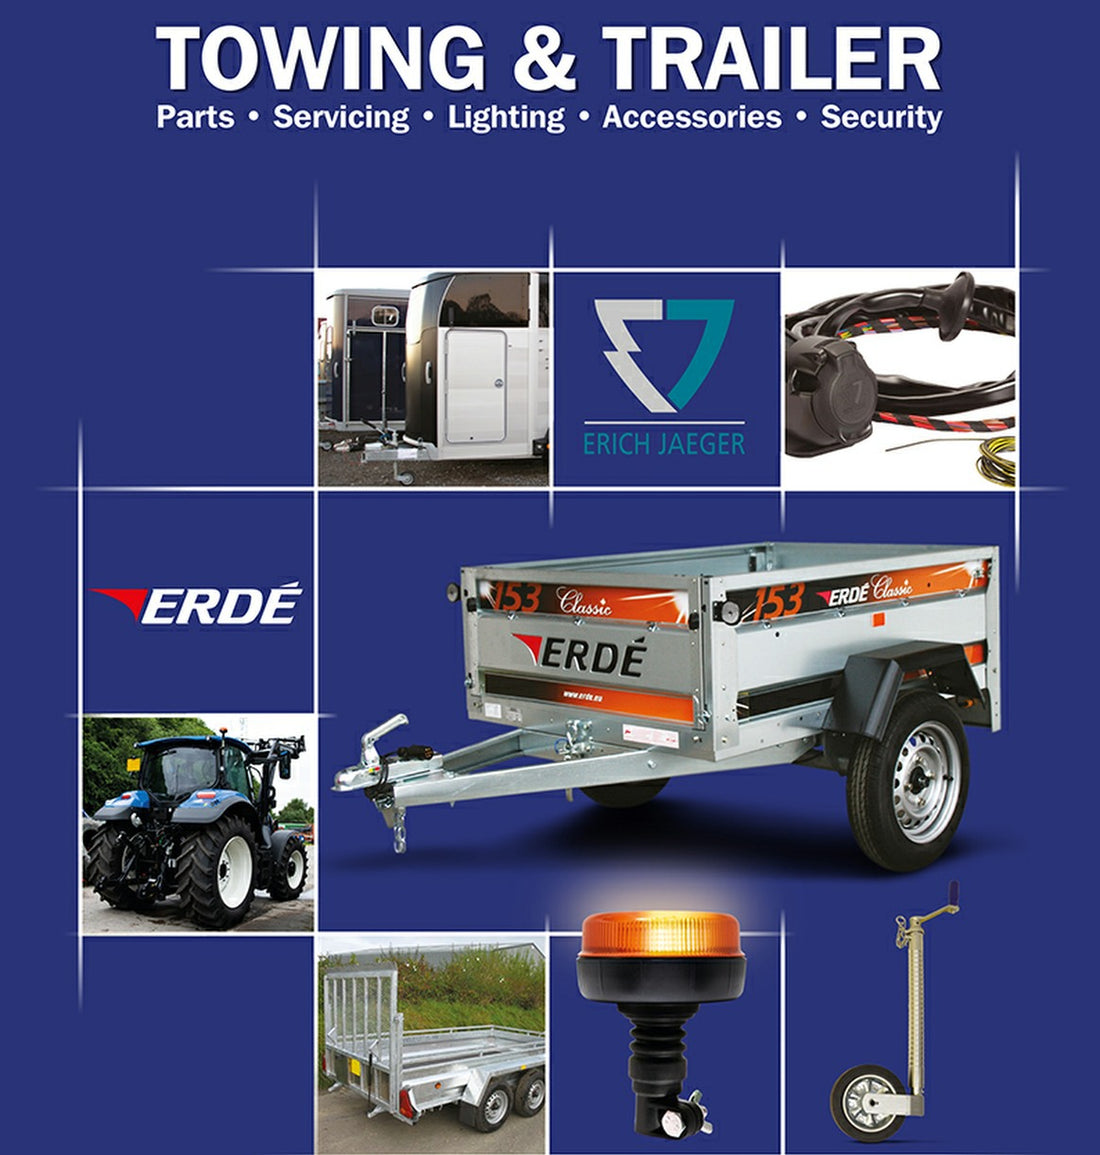 Towing & Leisure products for your camper, caravan, trailer or motorhome